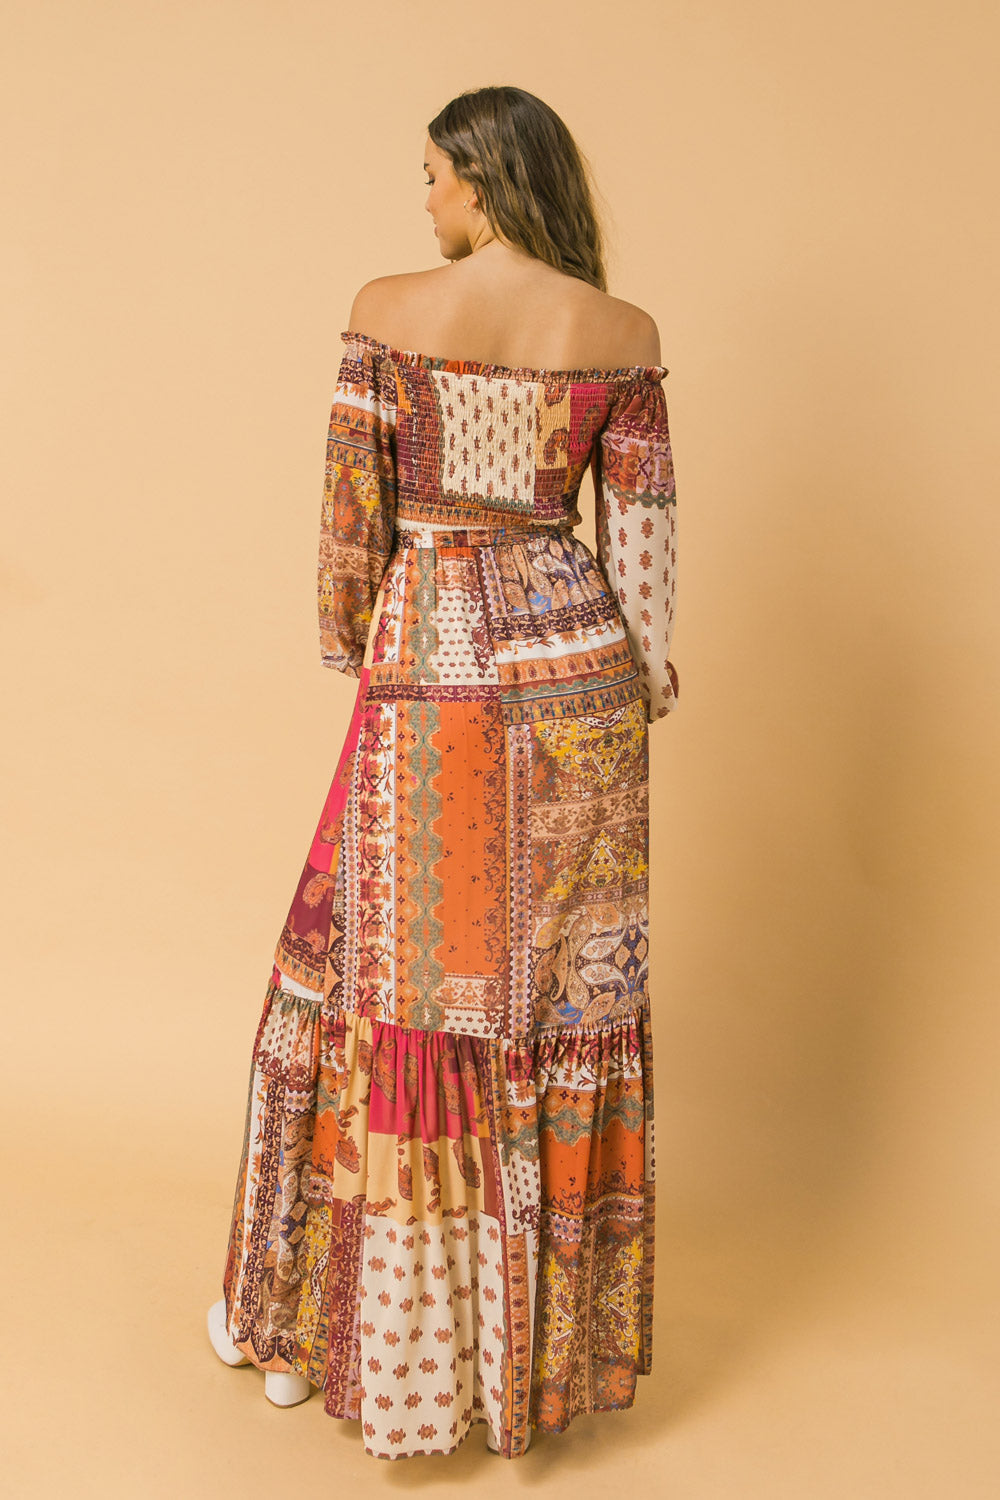 IT'S THE CHASE WOVEN MAXI DRESS